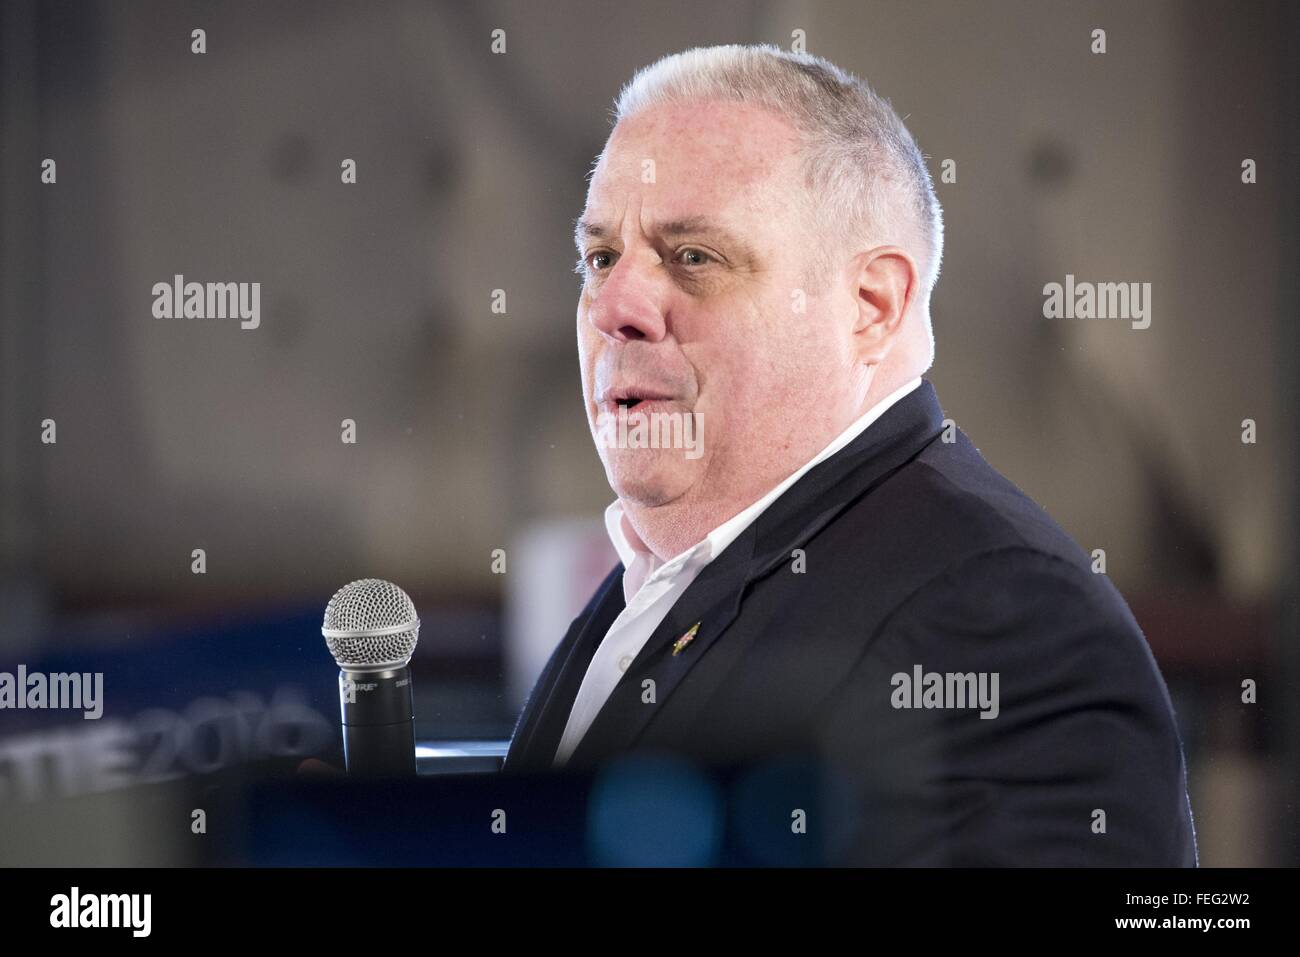 Bedford, N.H, USA. 6th Feb, 2016. Maryland Governor LARRY HOGAN endorses Republican presidential candidate and N.J. governor CHRIS CHRISTIE at a rally in Bedford, N.H. © Evan Sayles/ZUMA Wire/Alamy Live News Stock Photo